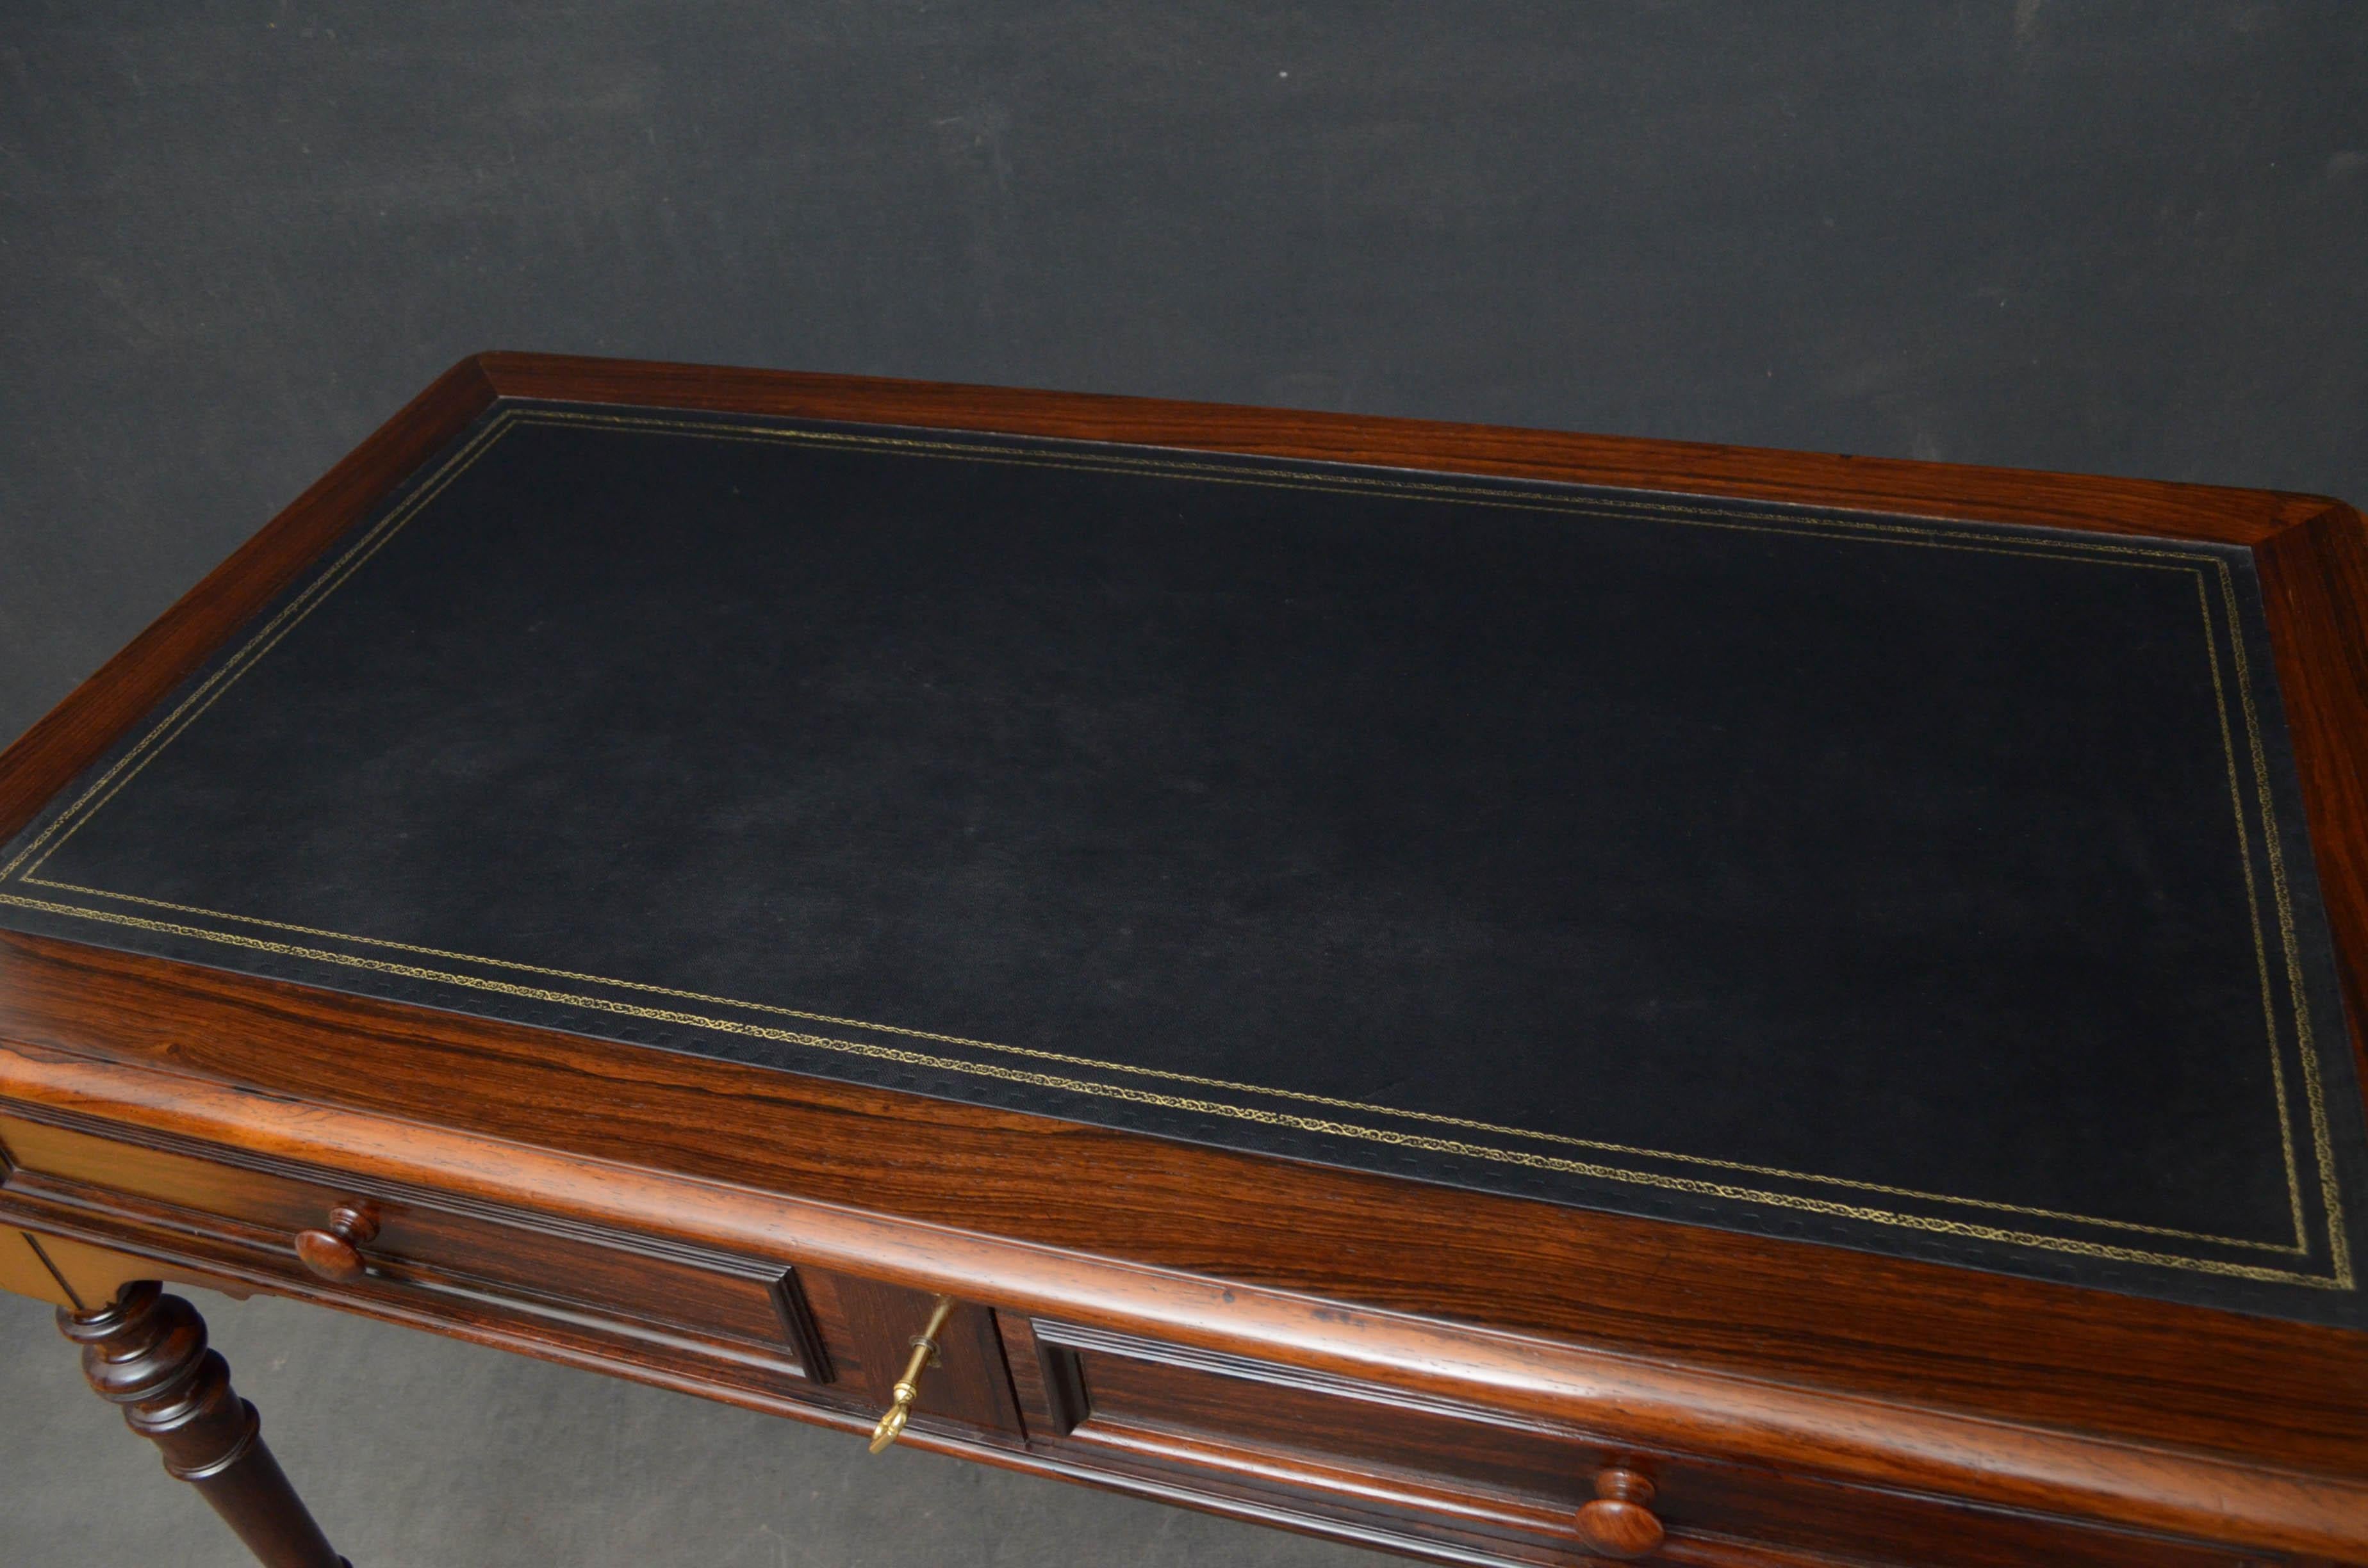 Sn4691, a very elegant French writing table in rosewood, having black tooled leather top and 2 moulded mahogany lined drawers fitted with original working lock and key, standing on slender turned legs terminating in original brass castors, all in